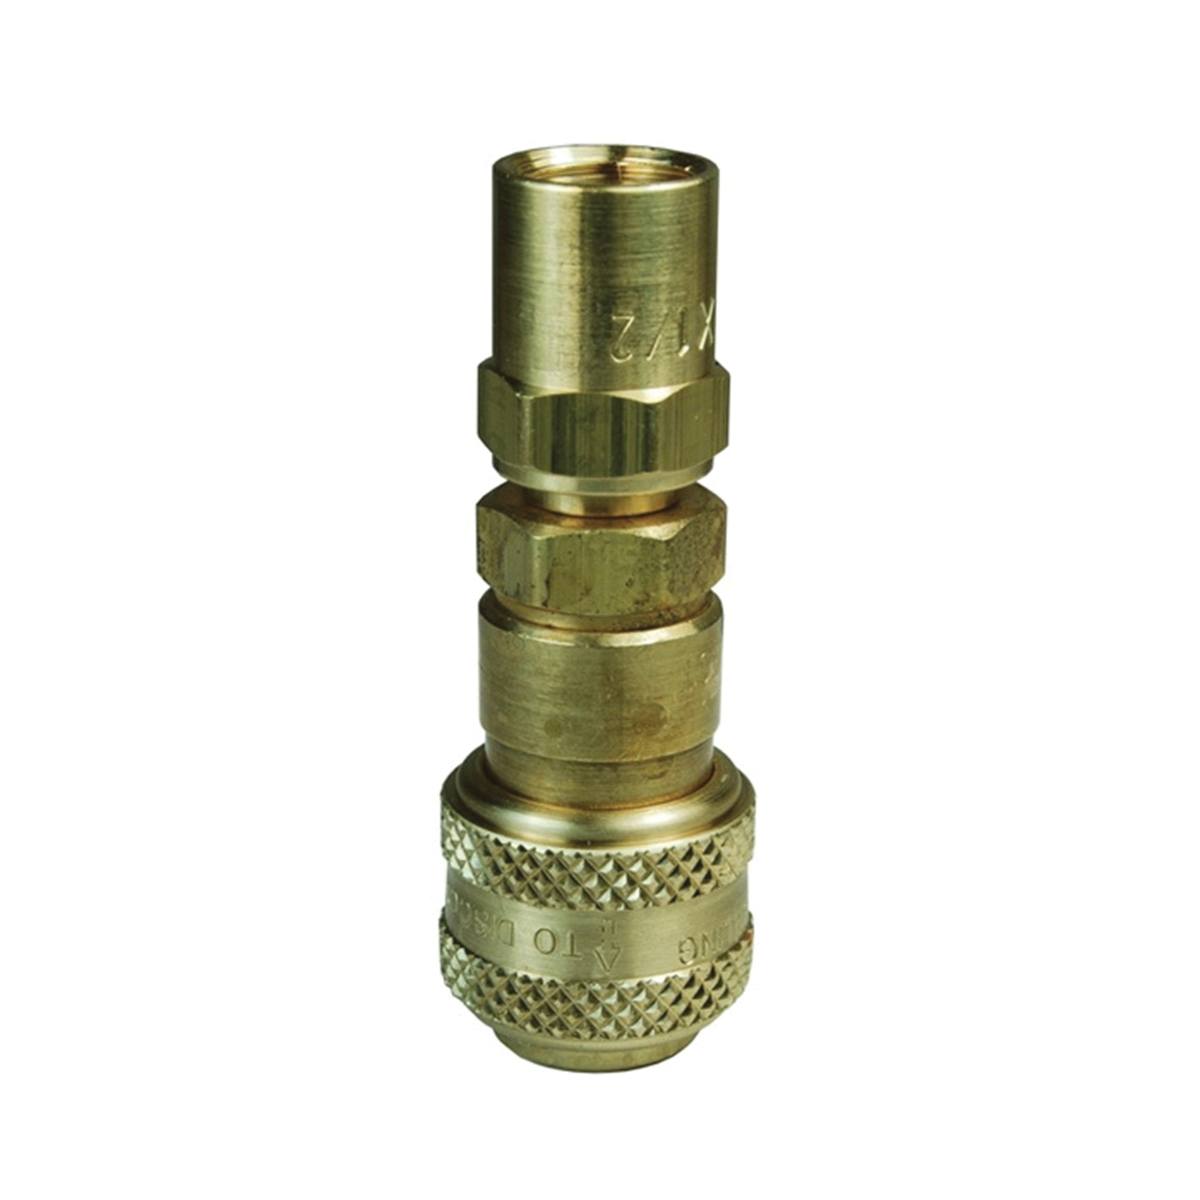 Pneumatic Automatic Reusable Barb Coupling, 1/4 x 3/8 in Fitting, Coupler x Hose Barb Connection, 300 psi Pressure